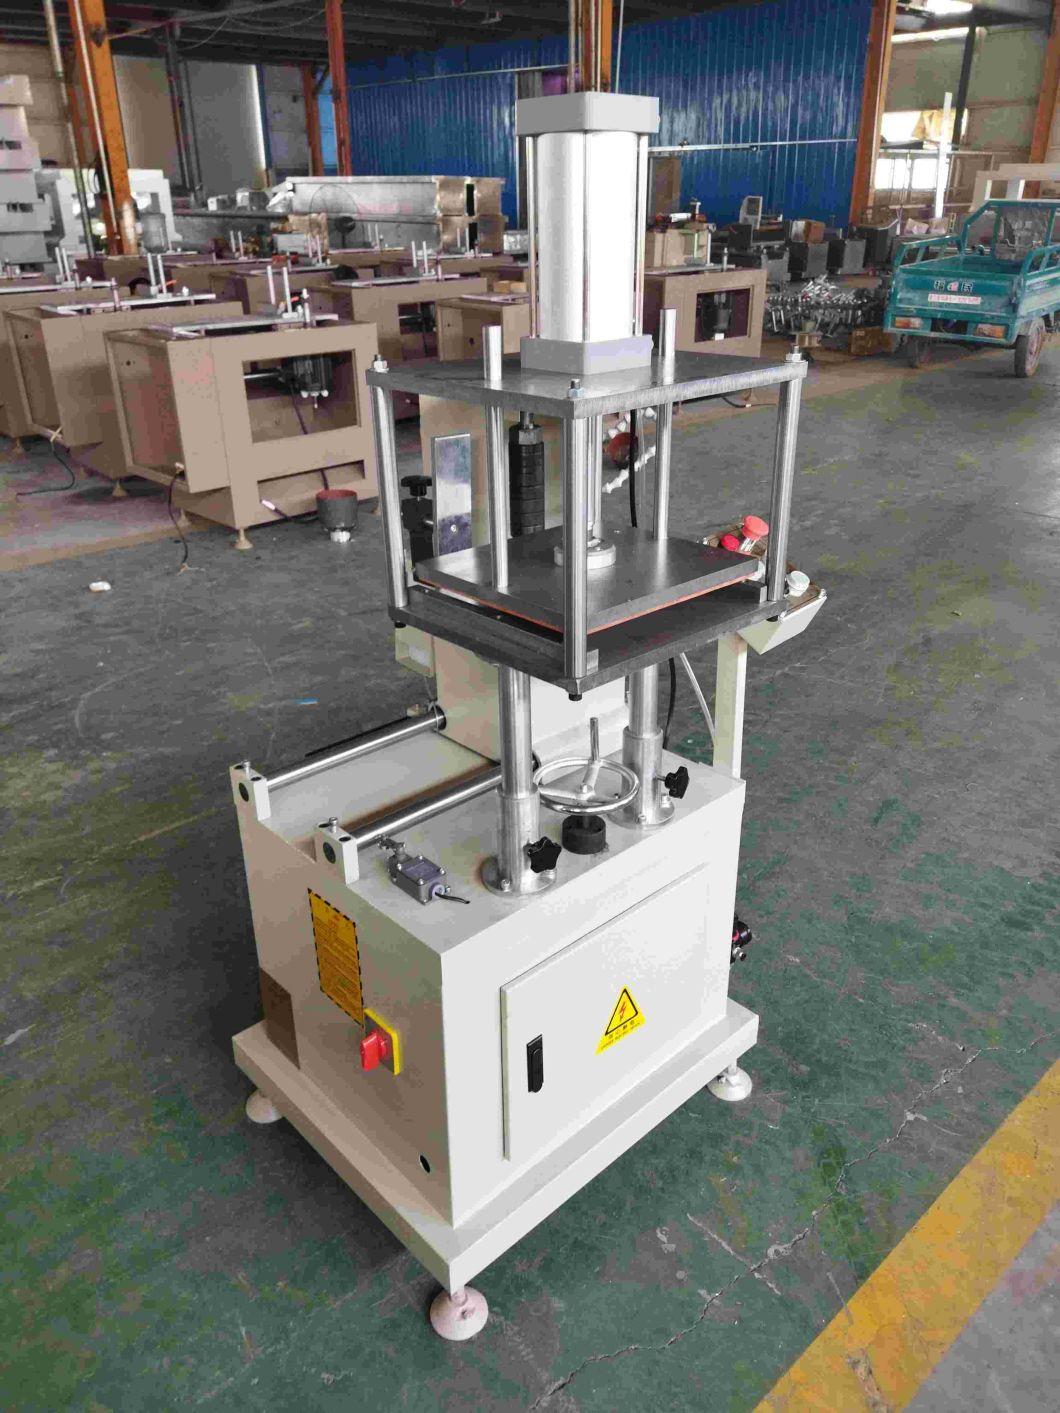 Lxd-200A Endface Aluminum Profile Milling Machine for Tenons CNC Machine for Aluminum Doors and Windows